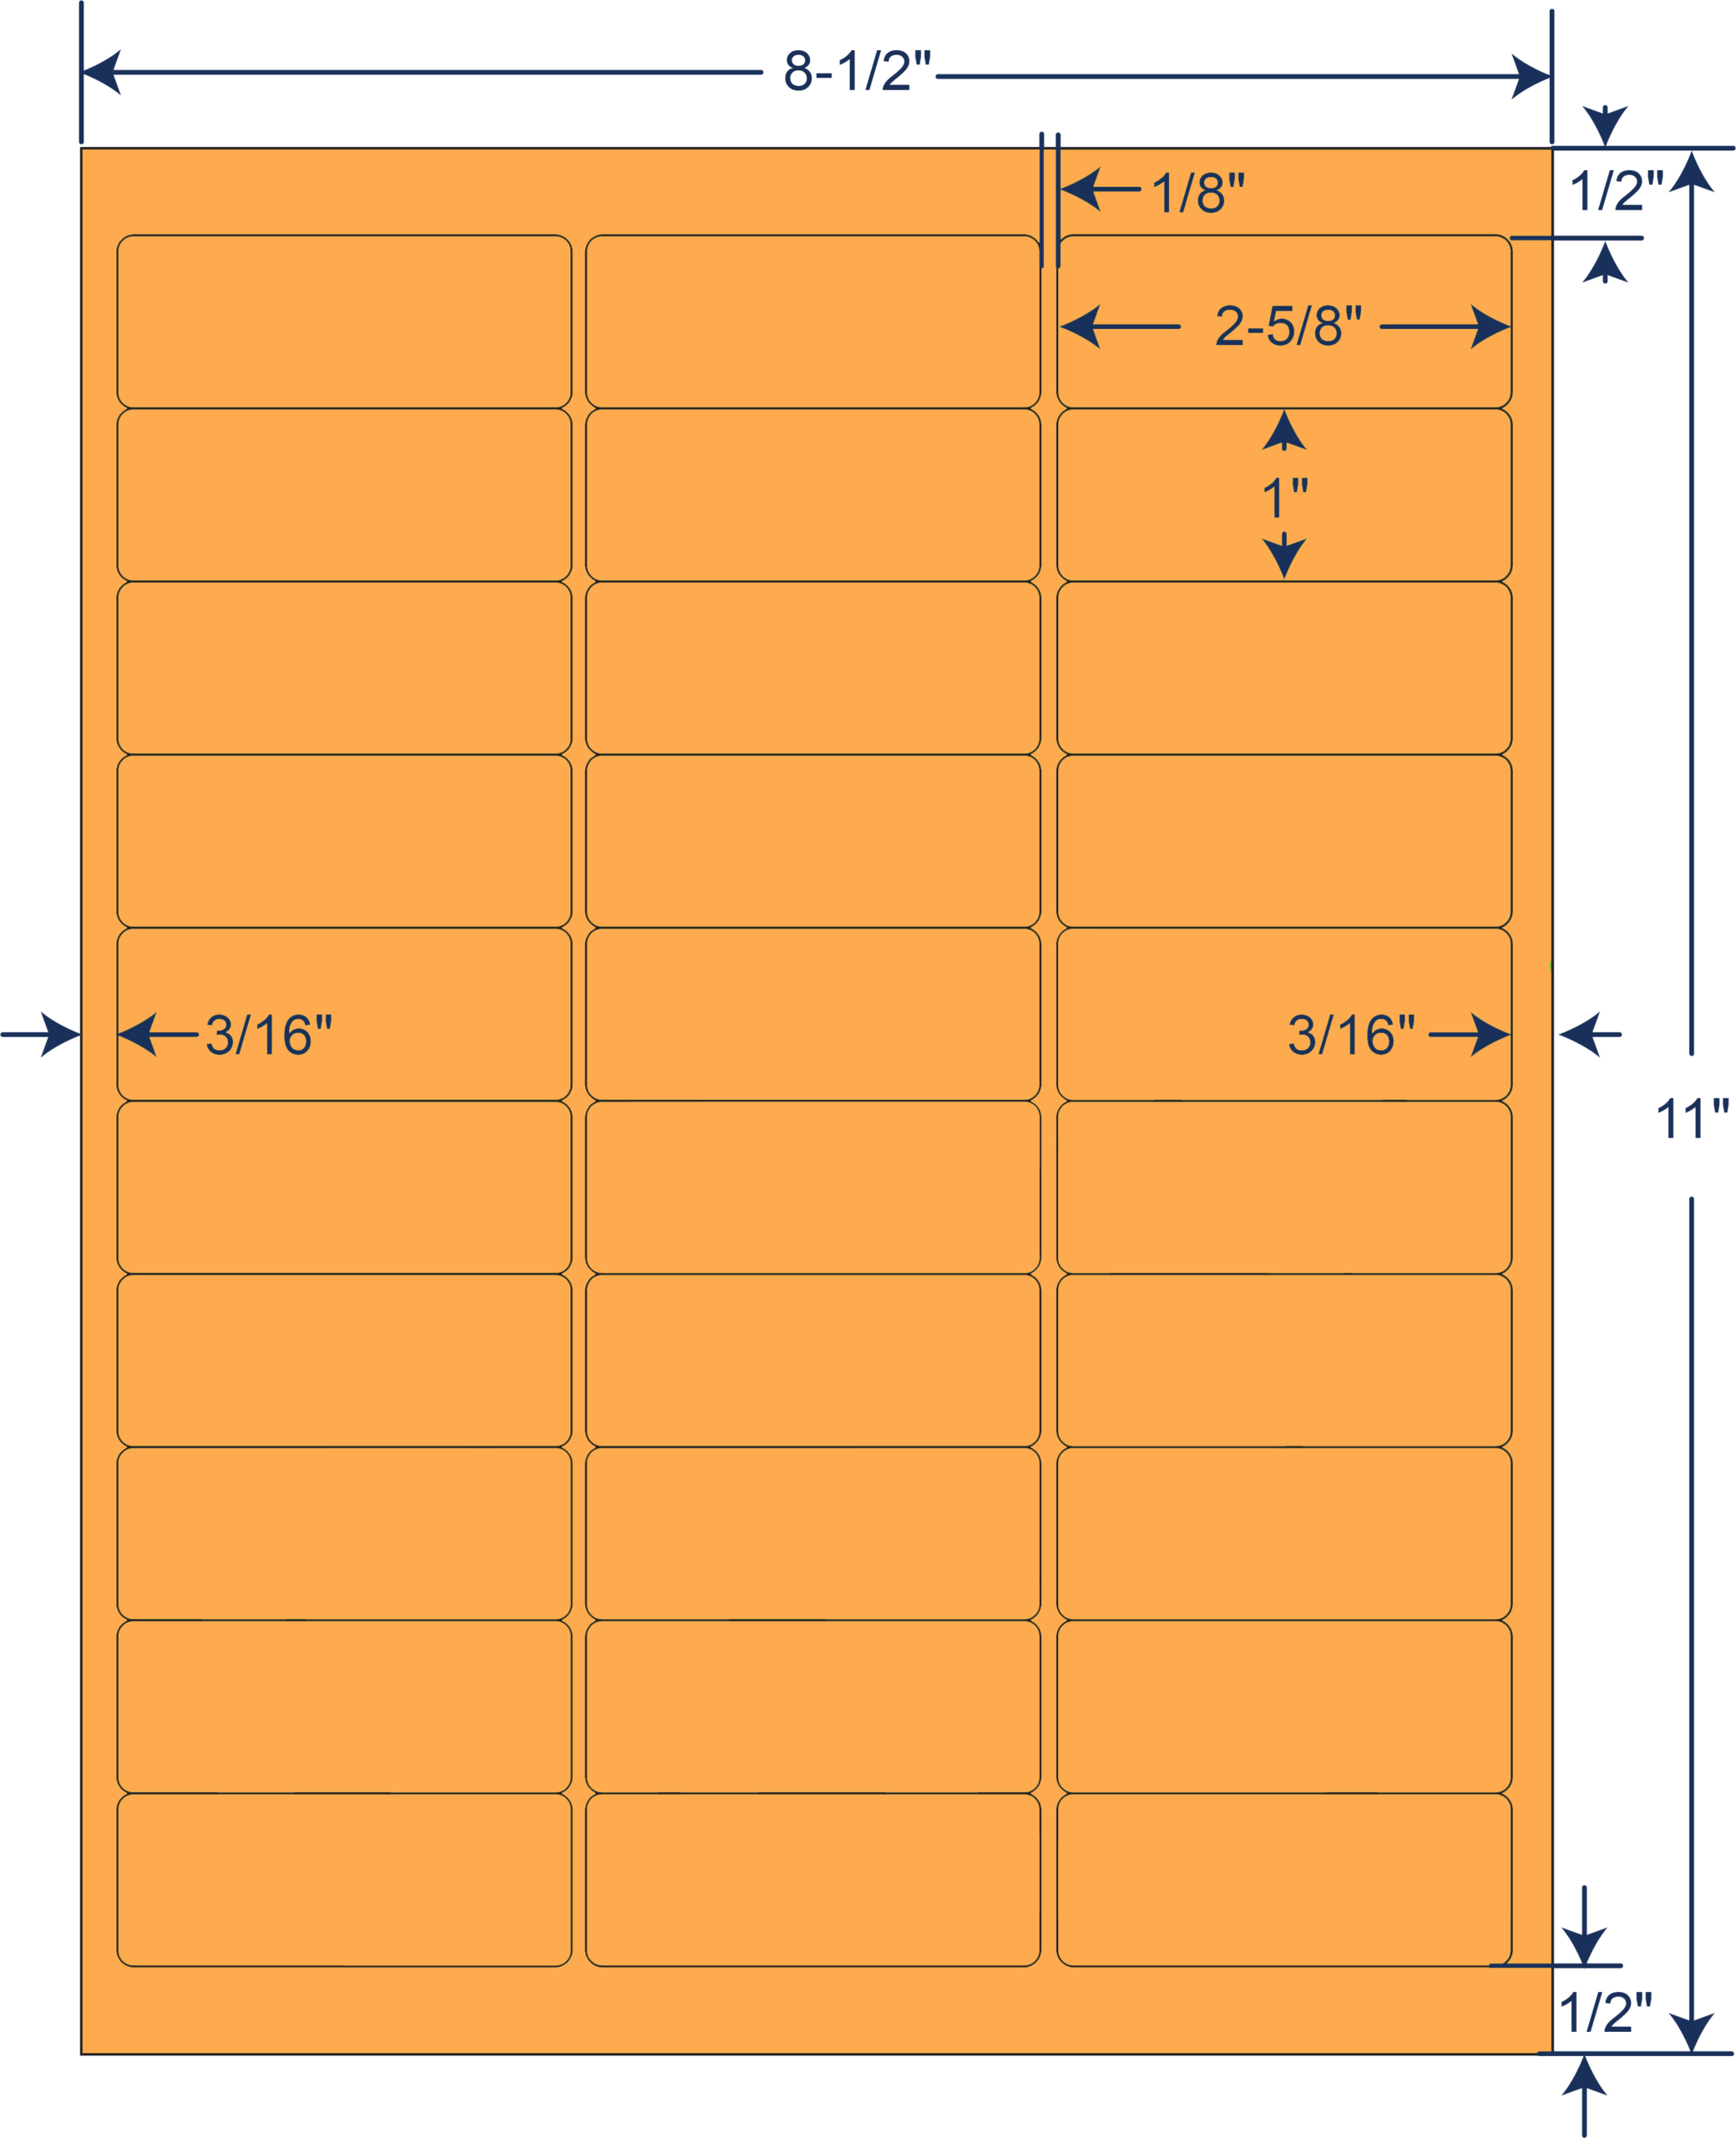 2-5/8" x 1" Fluorescent Orange Sheeted Labels (250 Sheets)